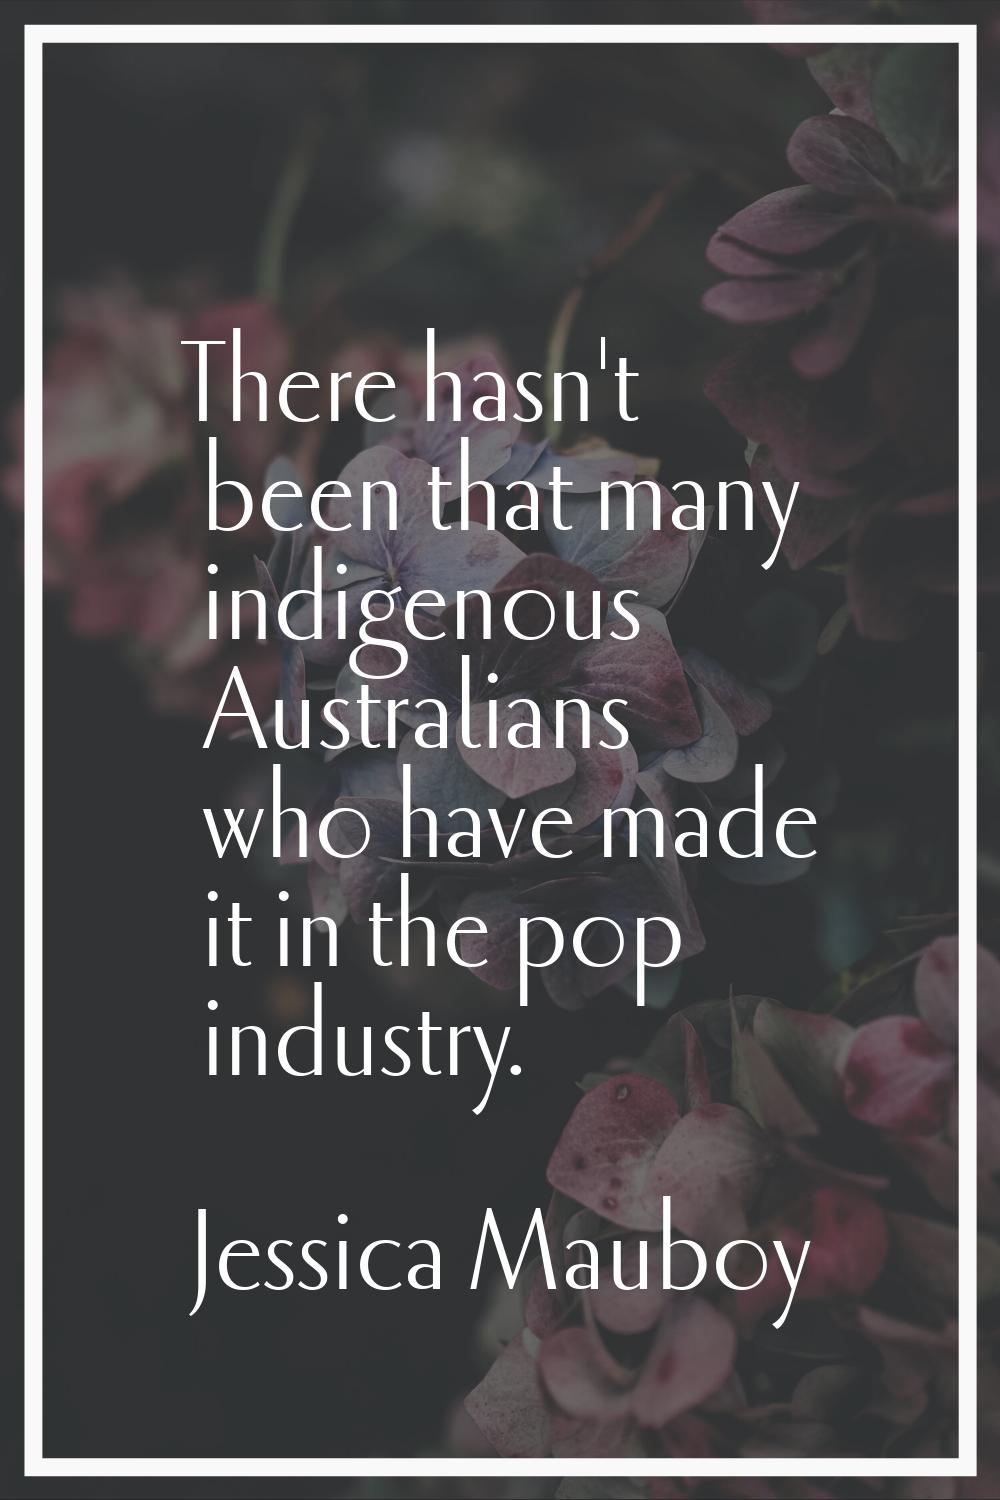 There hasn't been that many indigenous Australians who have made it in the pop industry.